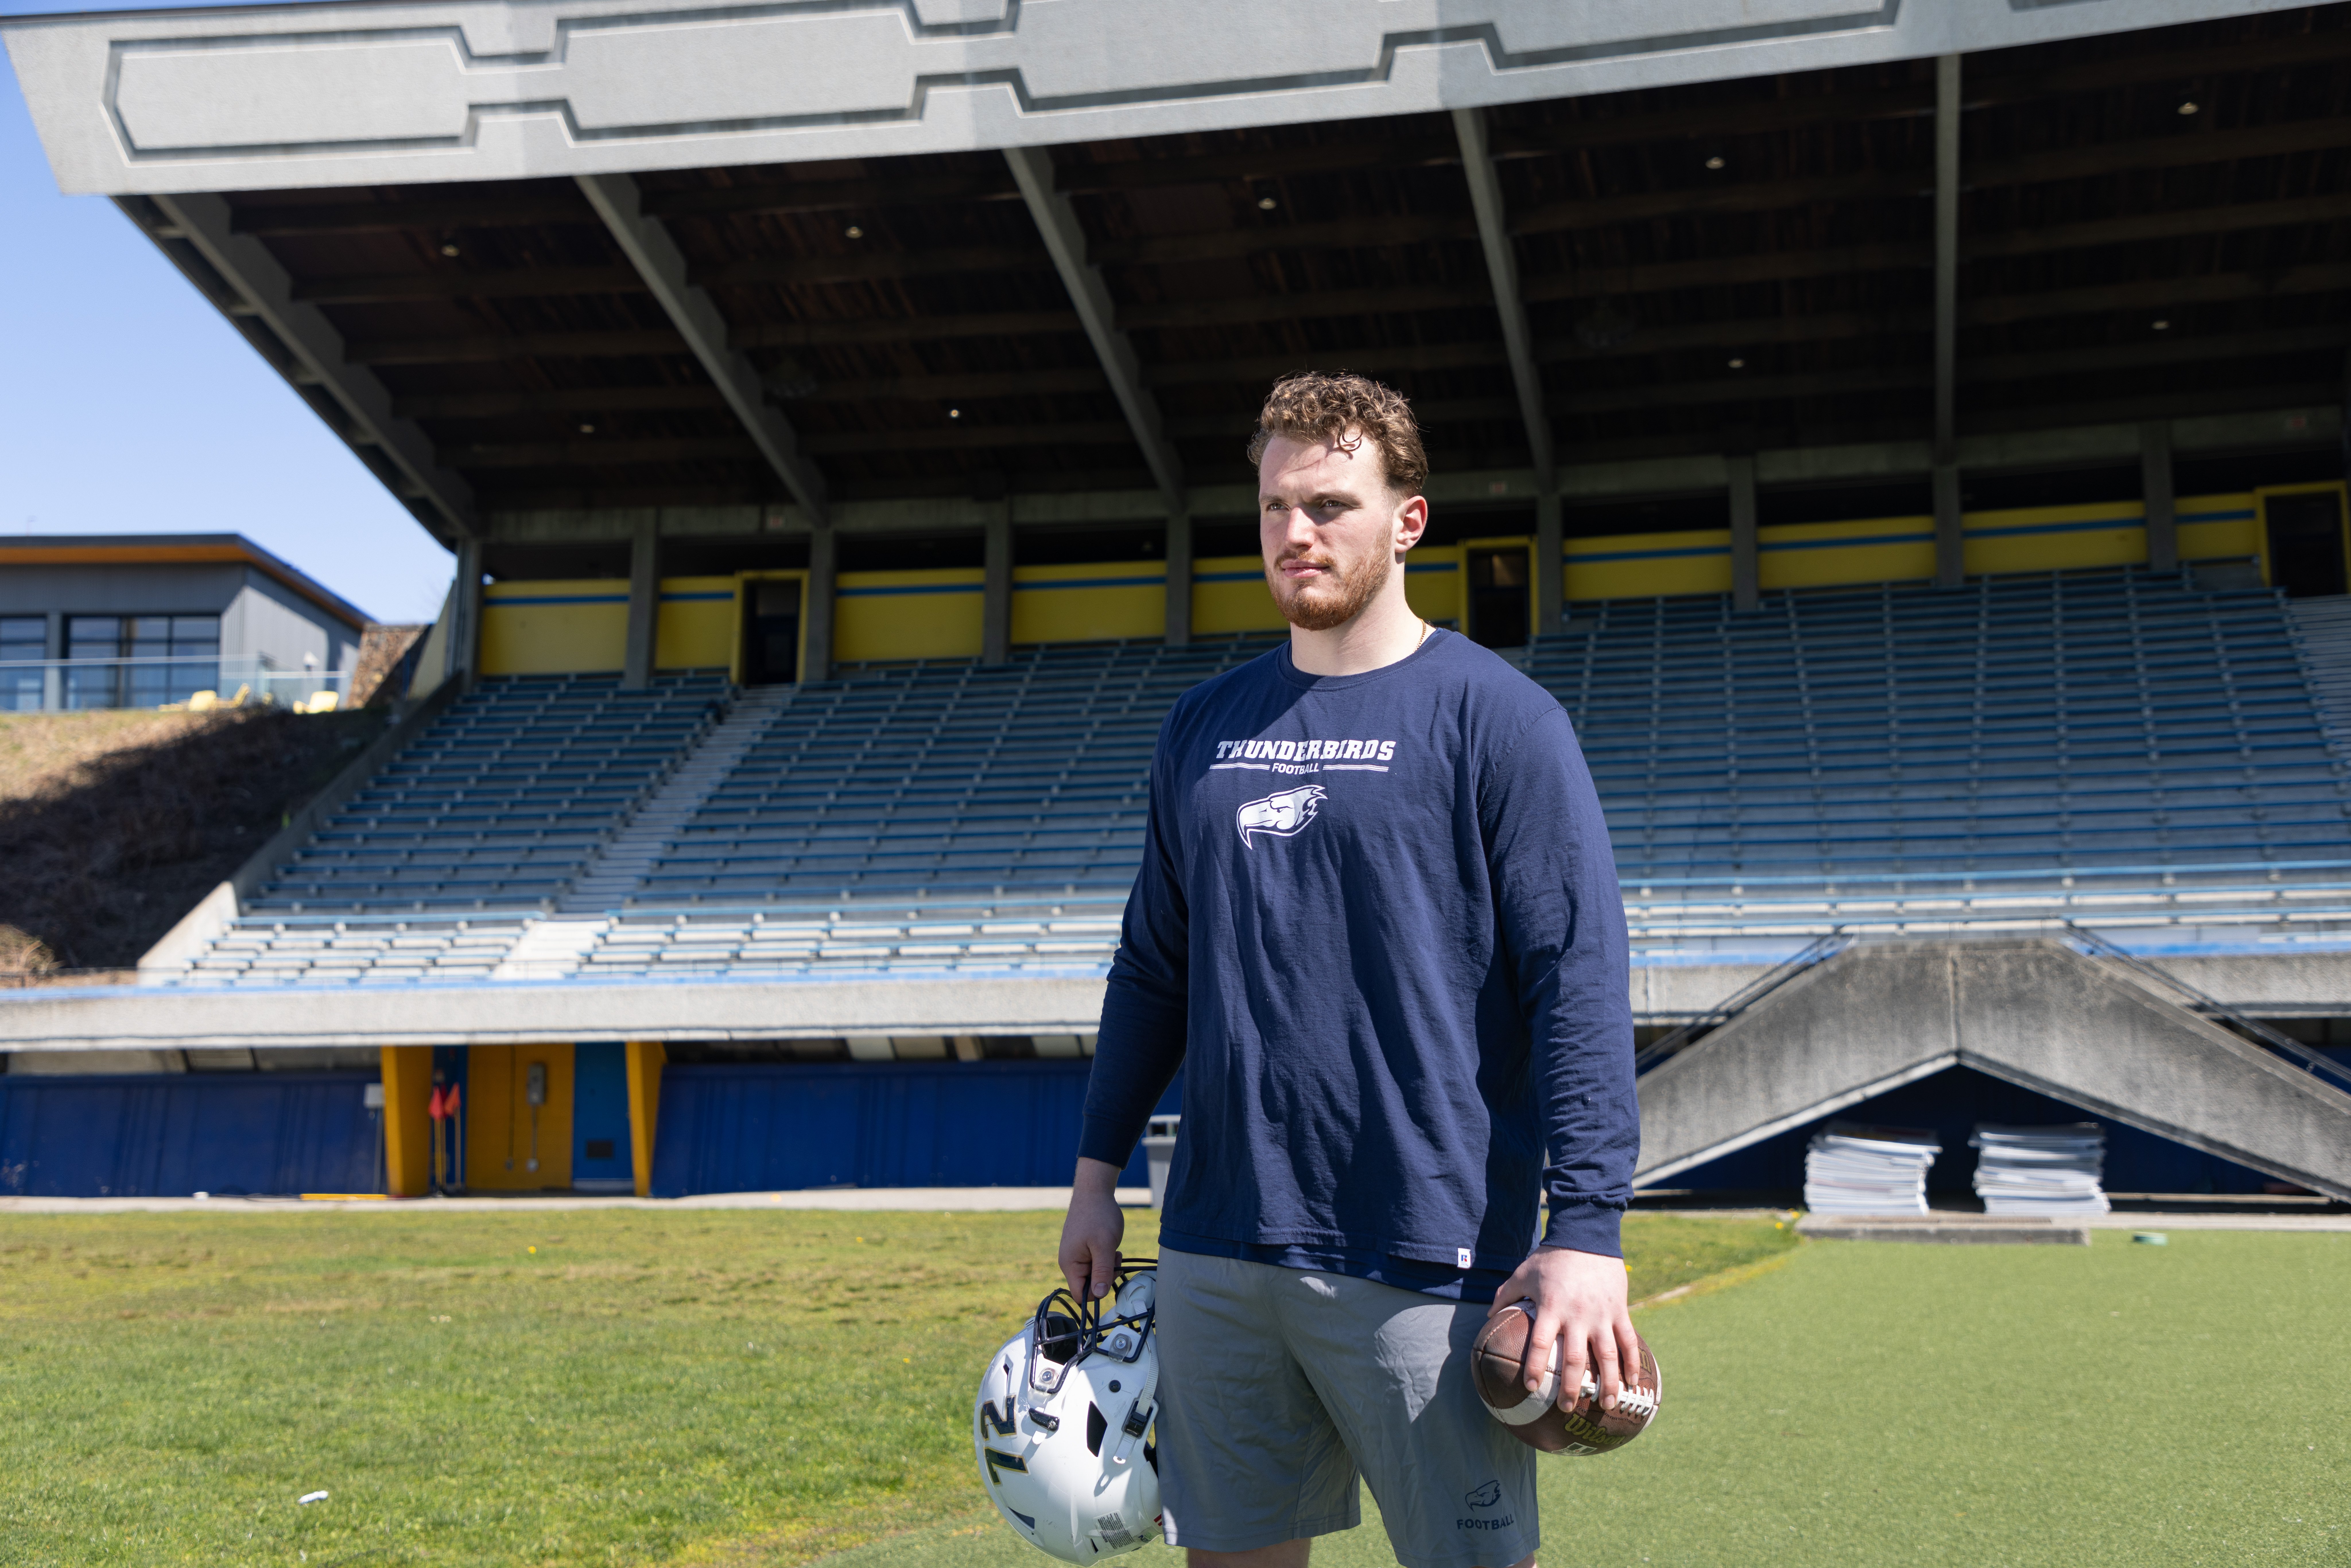 Growing up in North Vancouver, Benedet never aspired to make the NFL.